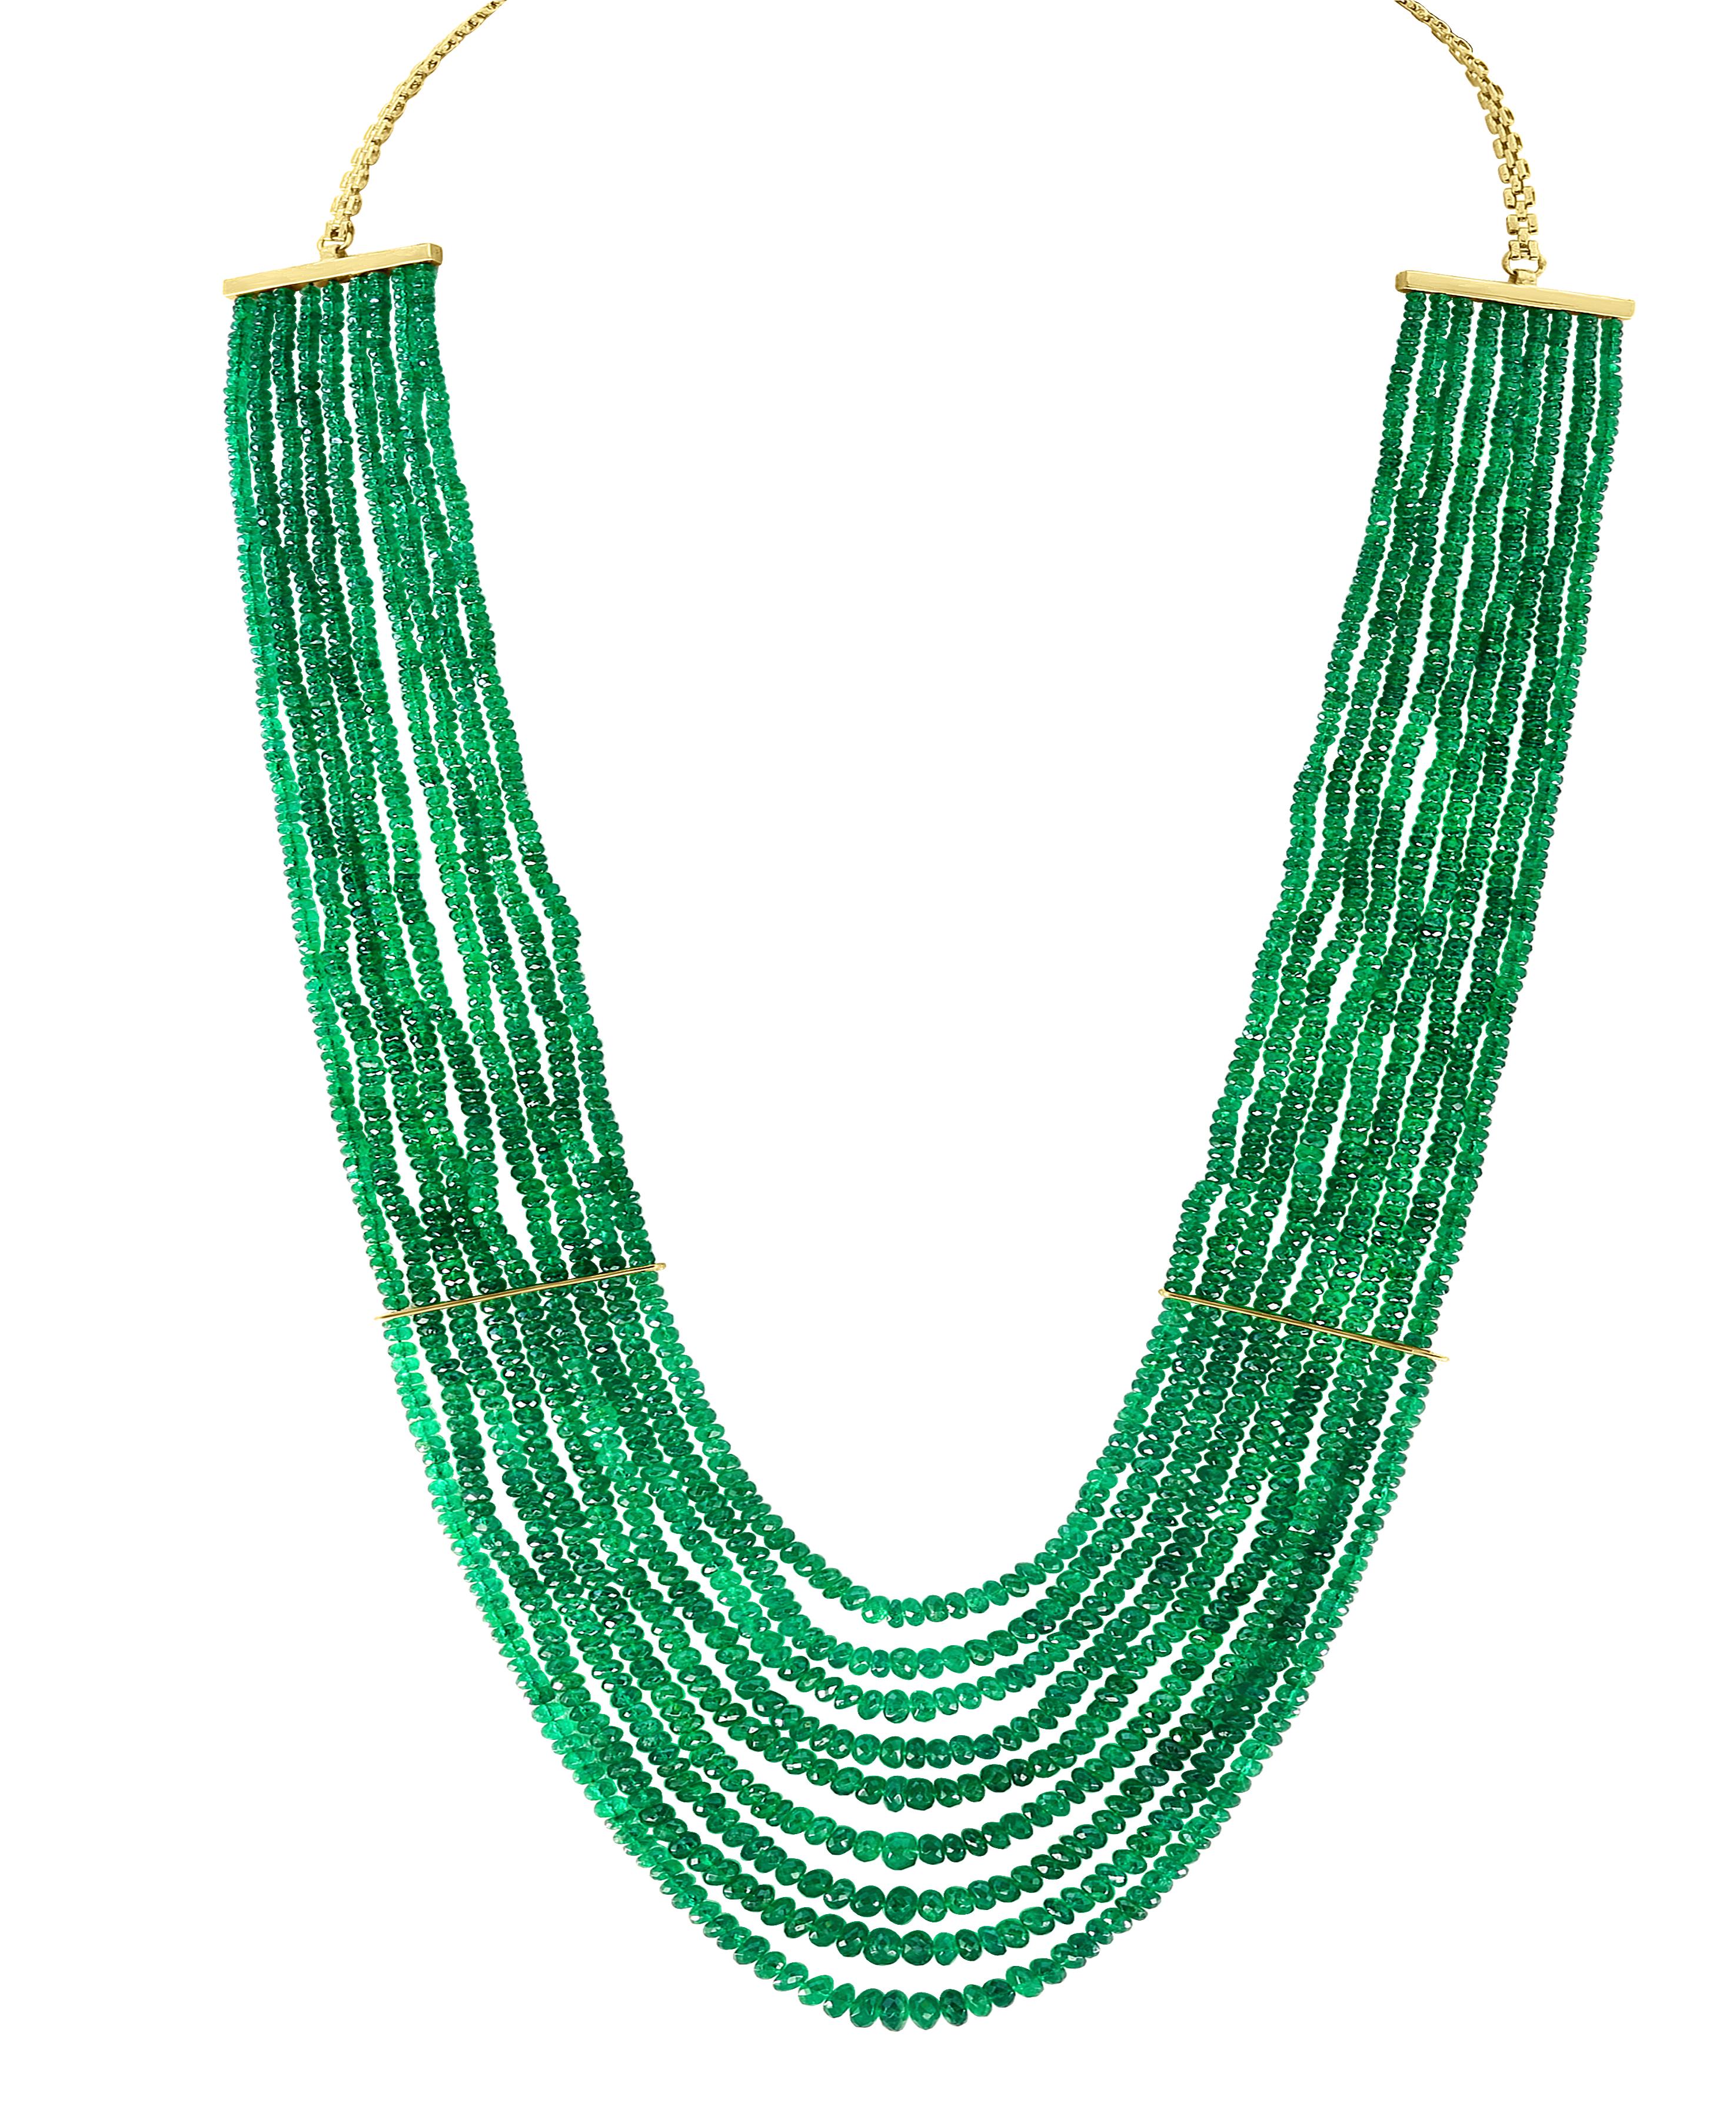 GIA Certified 400 Carat  Natural Colombian Emerald Bead Necklace 18 Karat Yellow Gold Multi layers
GIA Report 2155402618
This spectacular Necklace   consisting of approximately 400 Ct   of  Certified Emerald Beads  .
A magnificent emerald bead